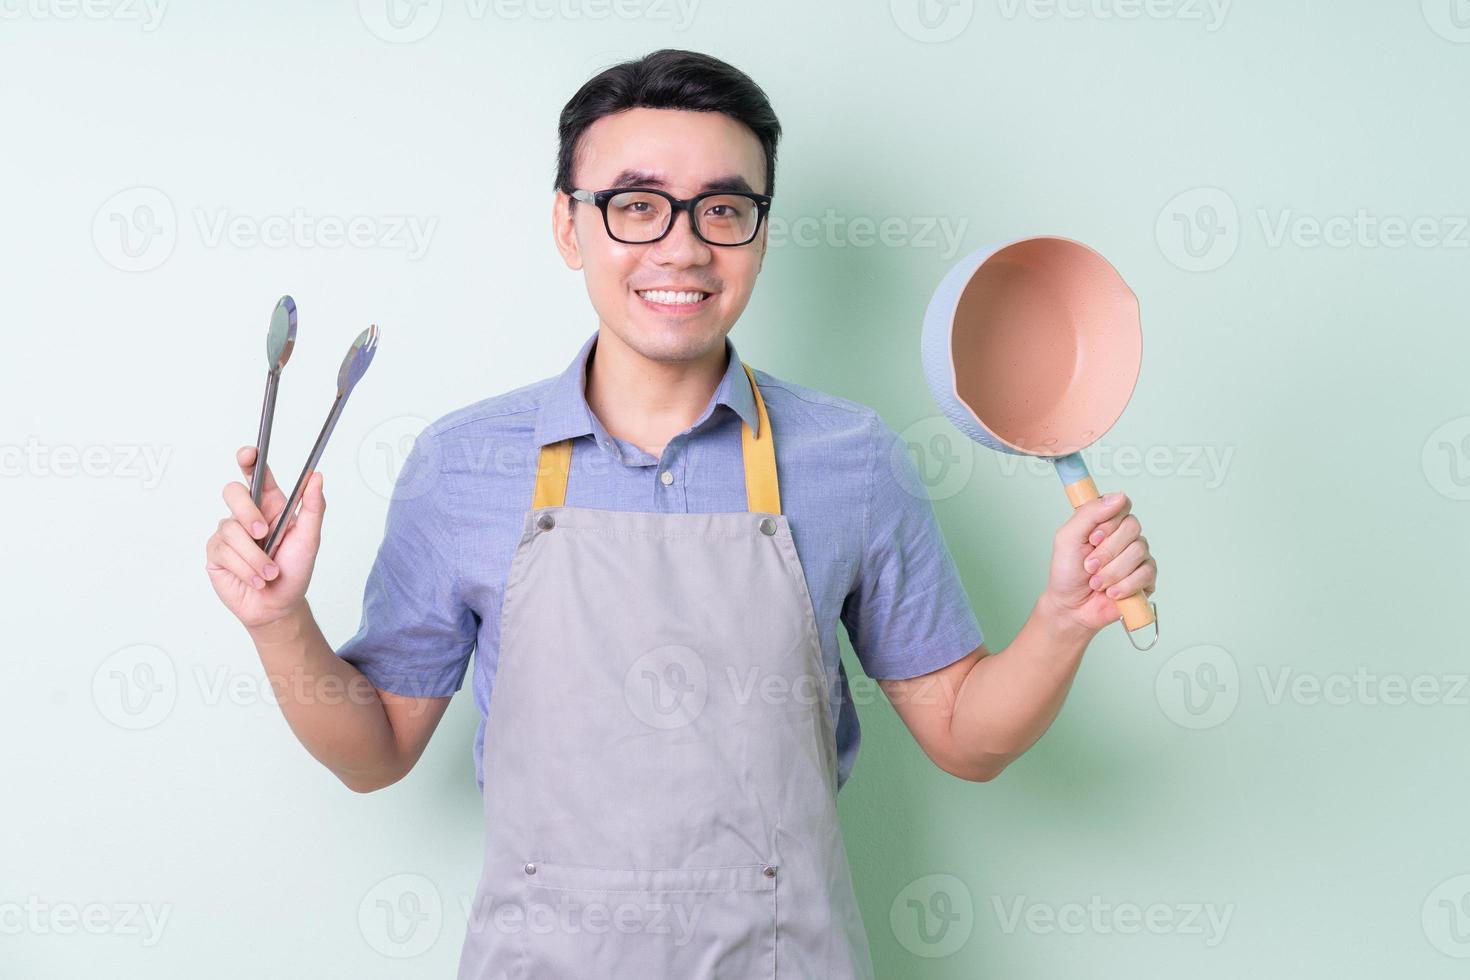 Young Asian man wearing apron posing on green background photo